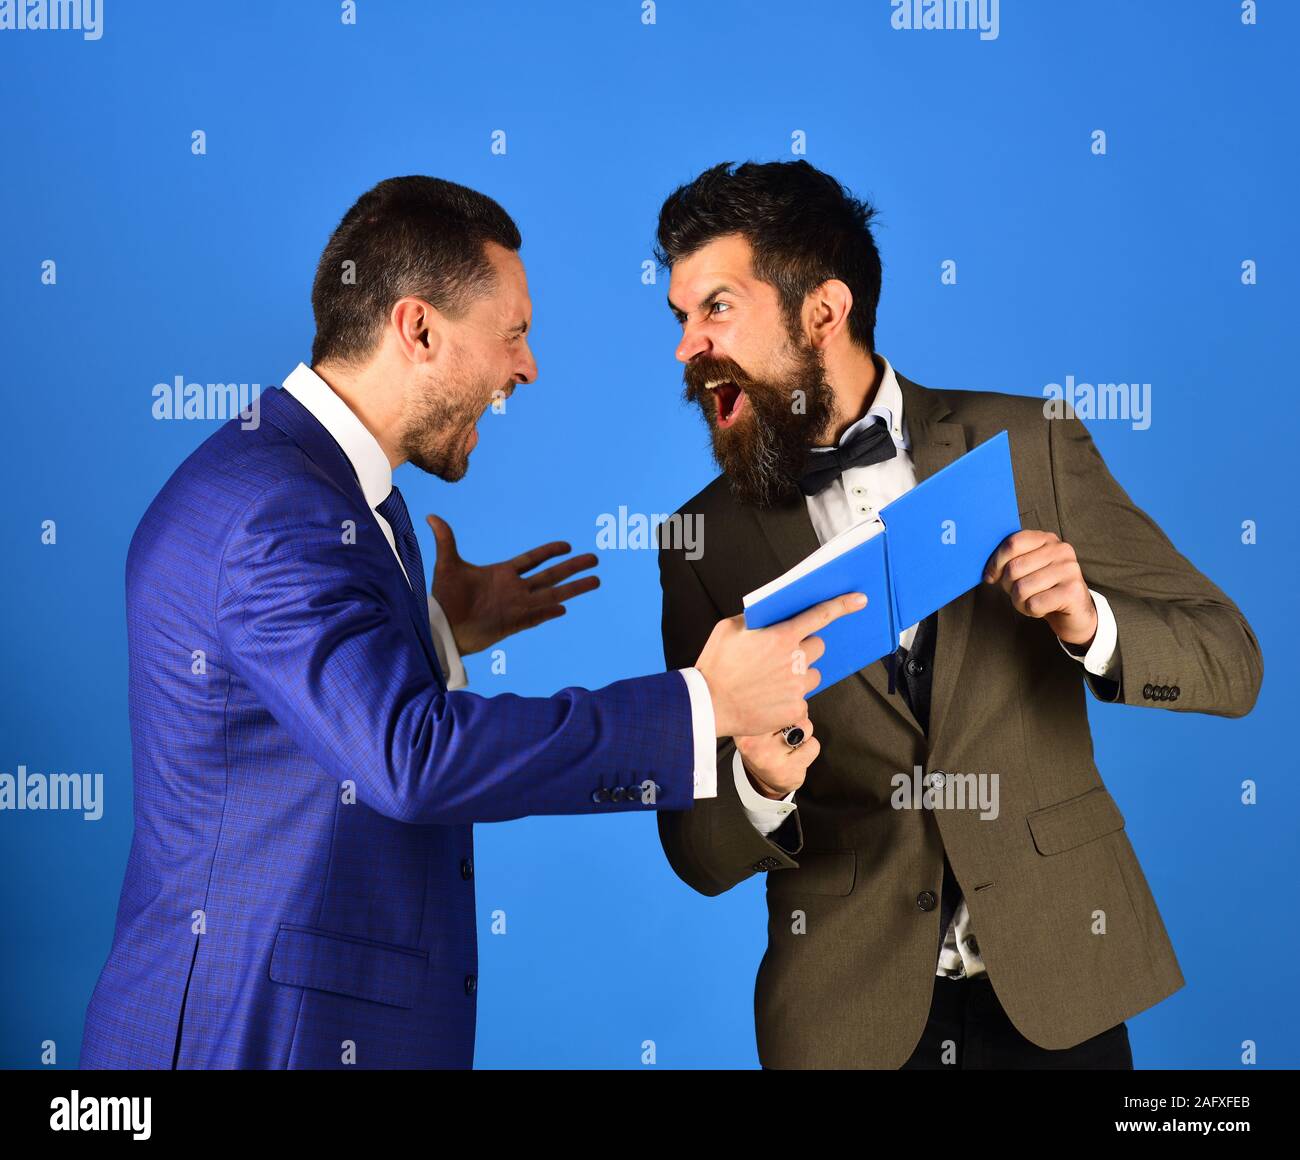 Business conflict and management concept. Machos in classic suits argue about schedule. Men with raging hold blue book. Businessmen with beards yell at each holding business notes Stock Photo -